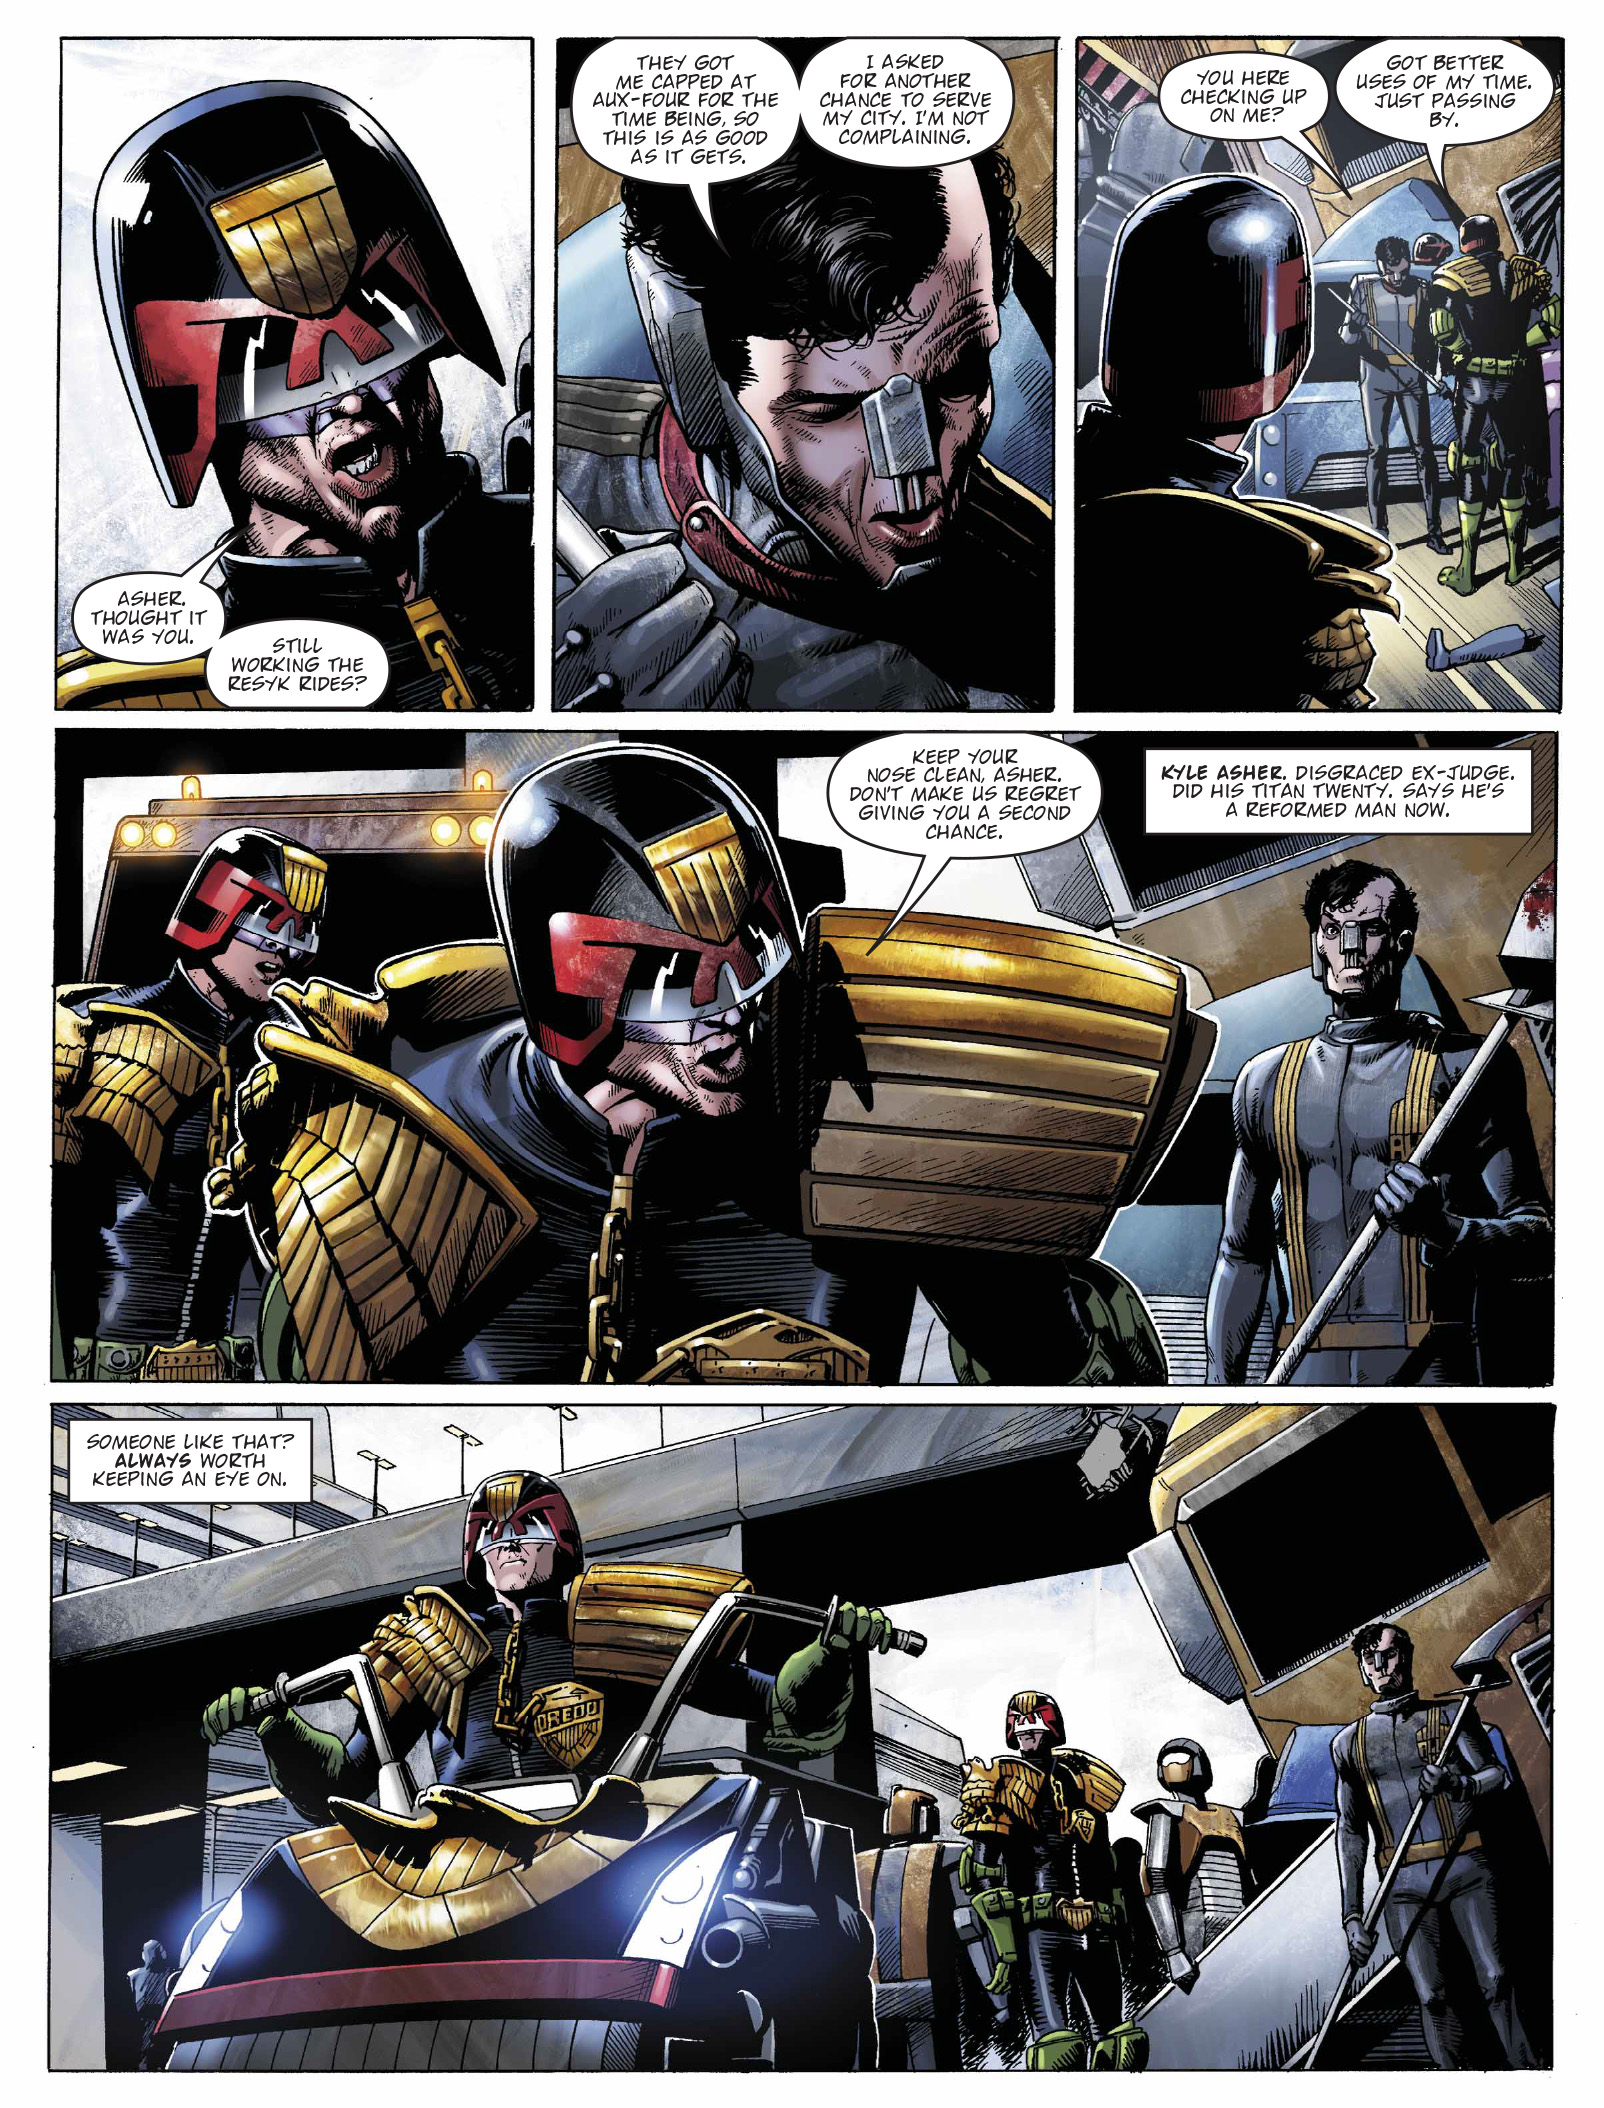 2000 AD: Chapter 2281 - Page 4